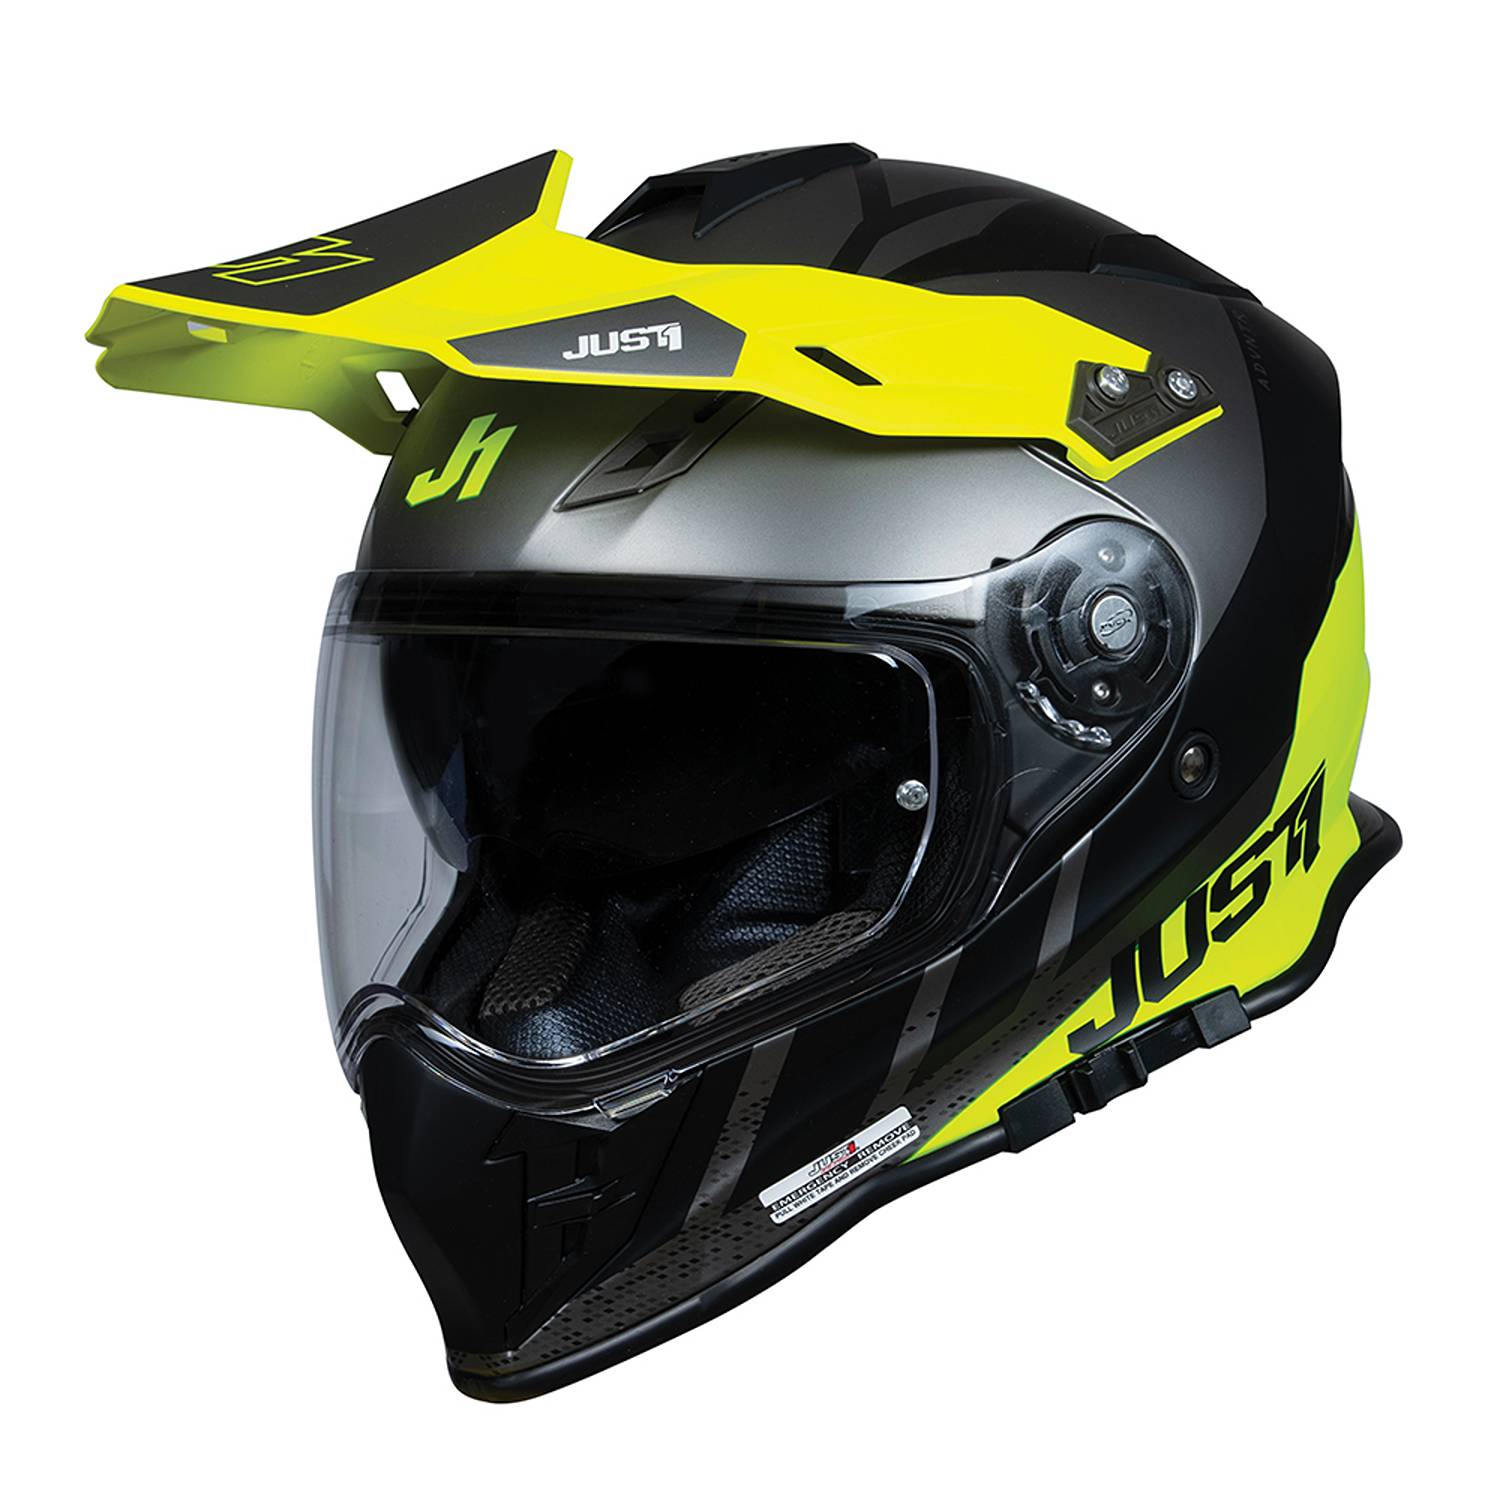 Image of Just1 J34 Pro Outerspace Yellow Fluo Titanium Adventure Helmet Size L ID 8055774027953